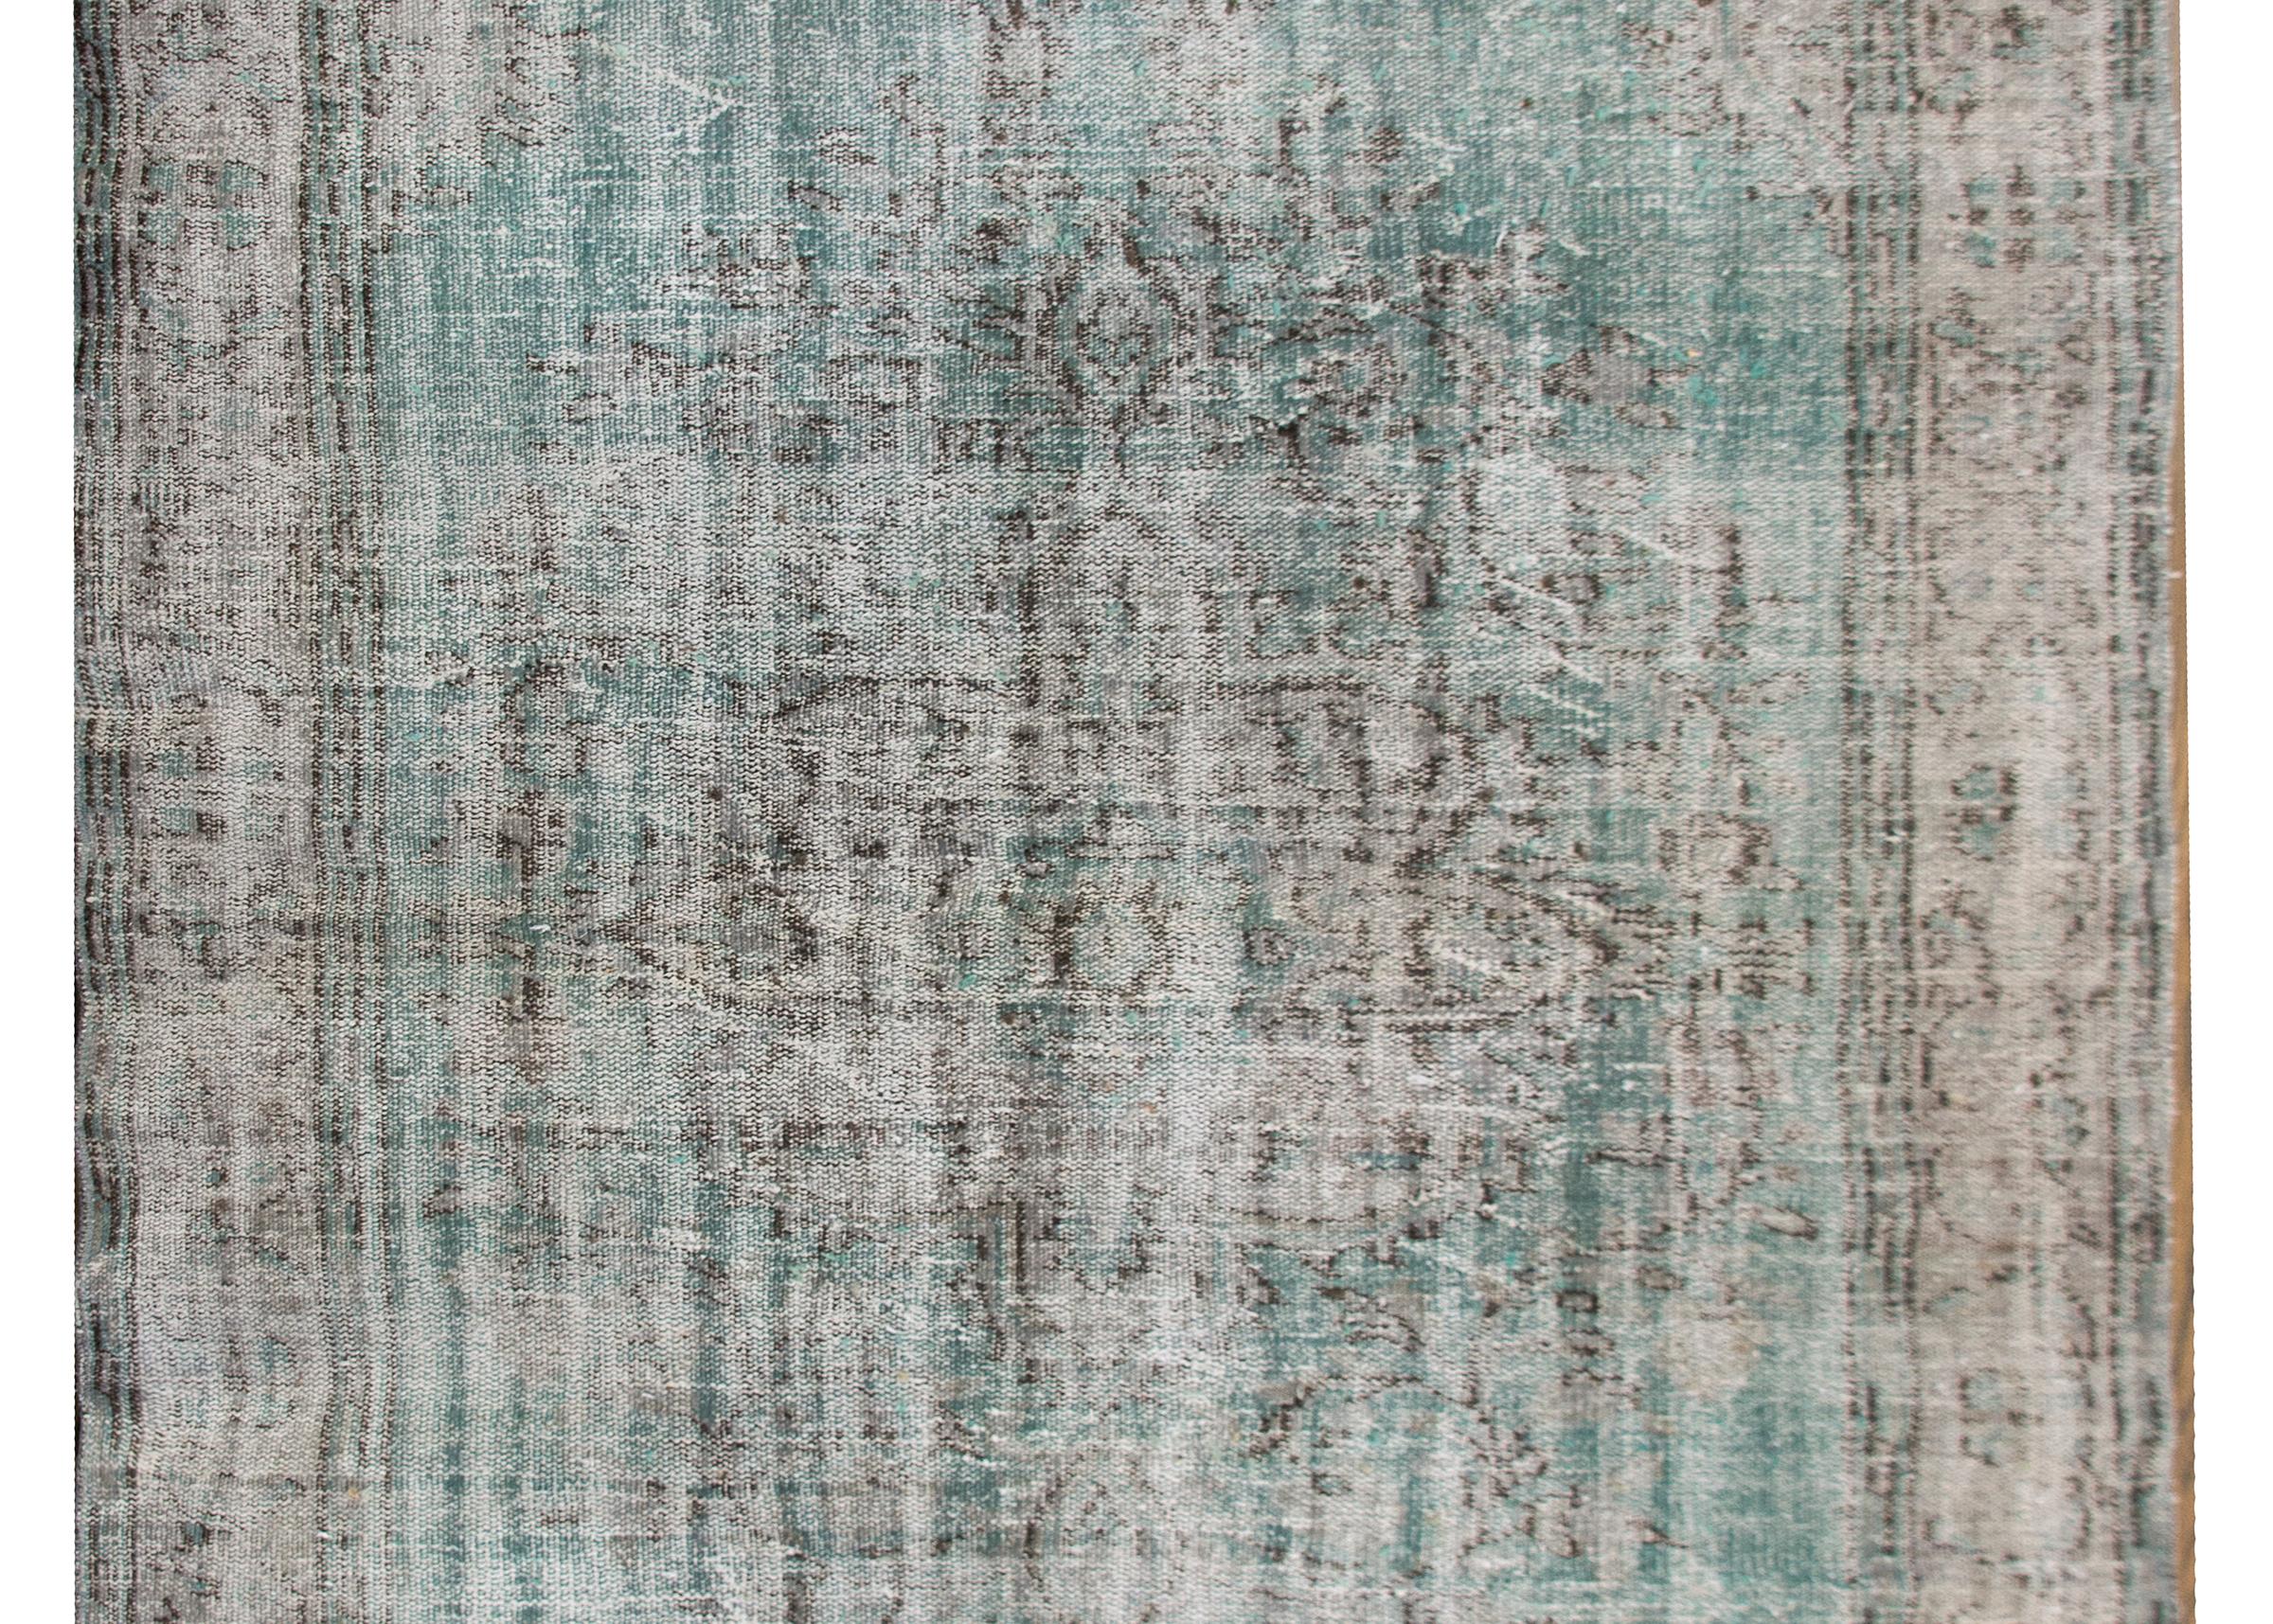 A wonderful vintage Turkish rug with a large central floral medallion living amidst a turquoise field, and surrounded by a wide floral patterned border, and all stonewashed to give it an antiqued feel.